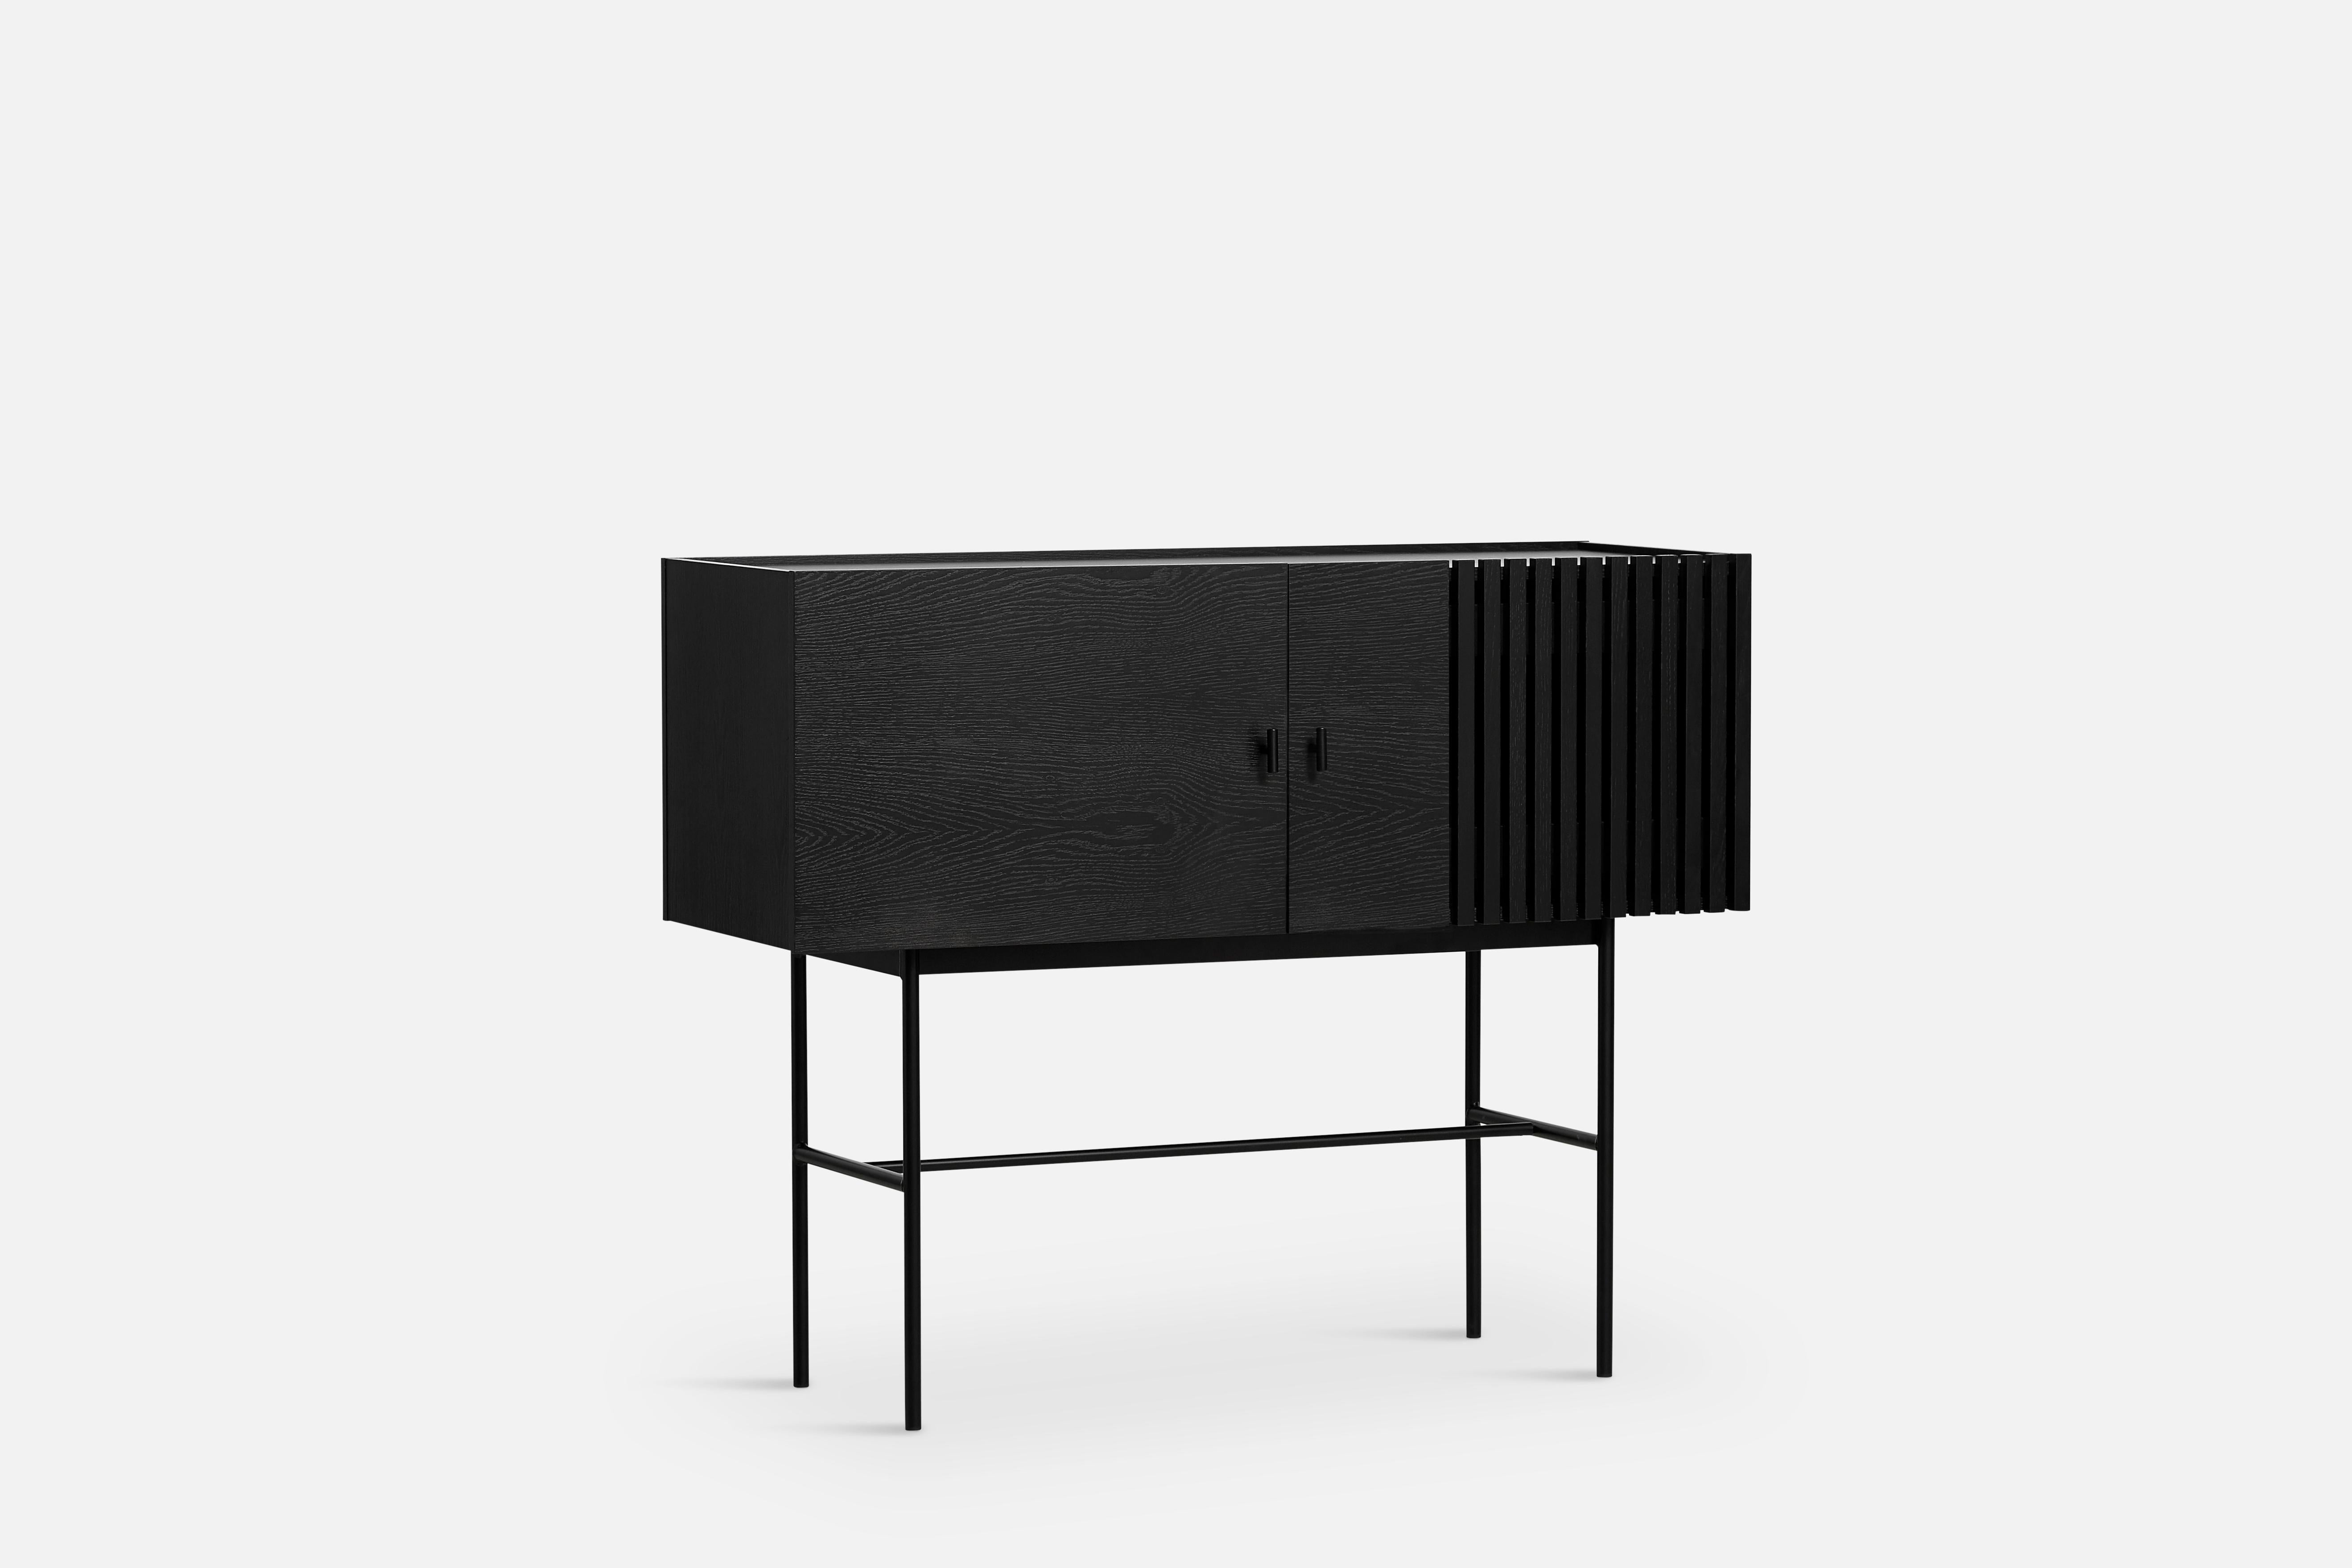 Black oak array sideboard 120 by Says Who.
Materials: oak, metal
Dimensions: D 44 x W 120 x H 97 cm
Also available in different colours and materials.

The founders, Mia and Torben Koed, decided to put their 30 years of experience into a new